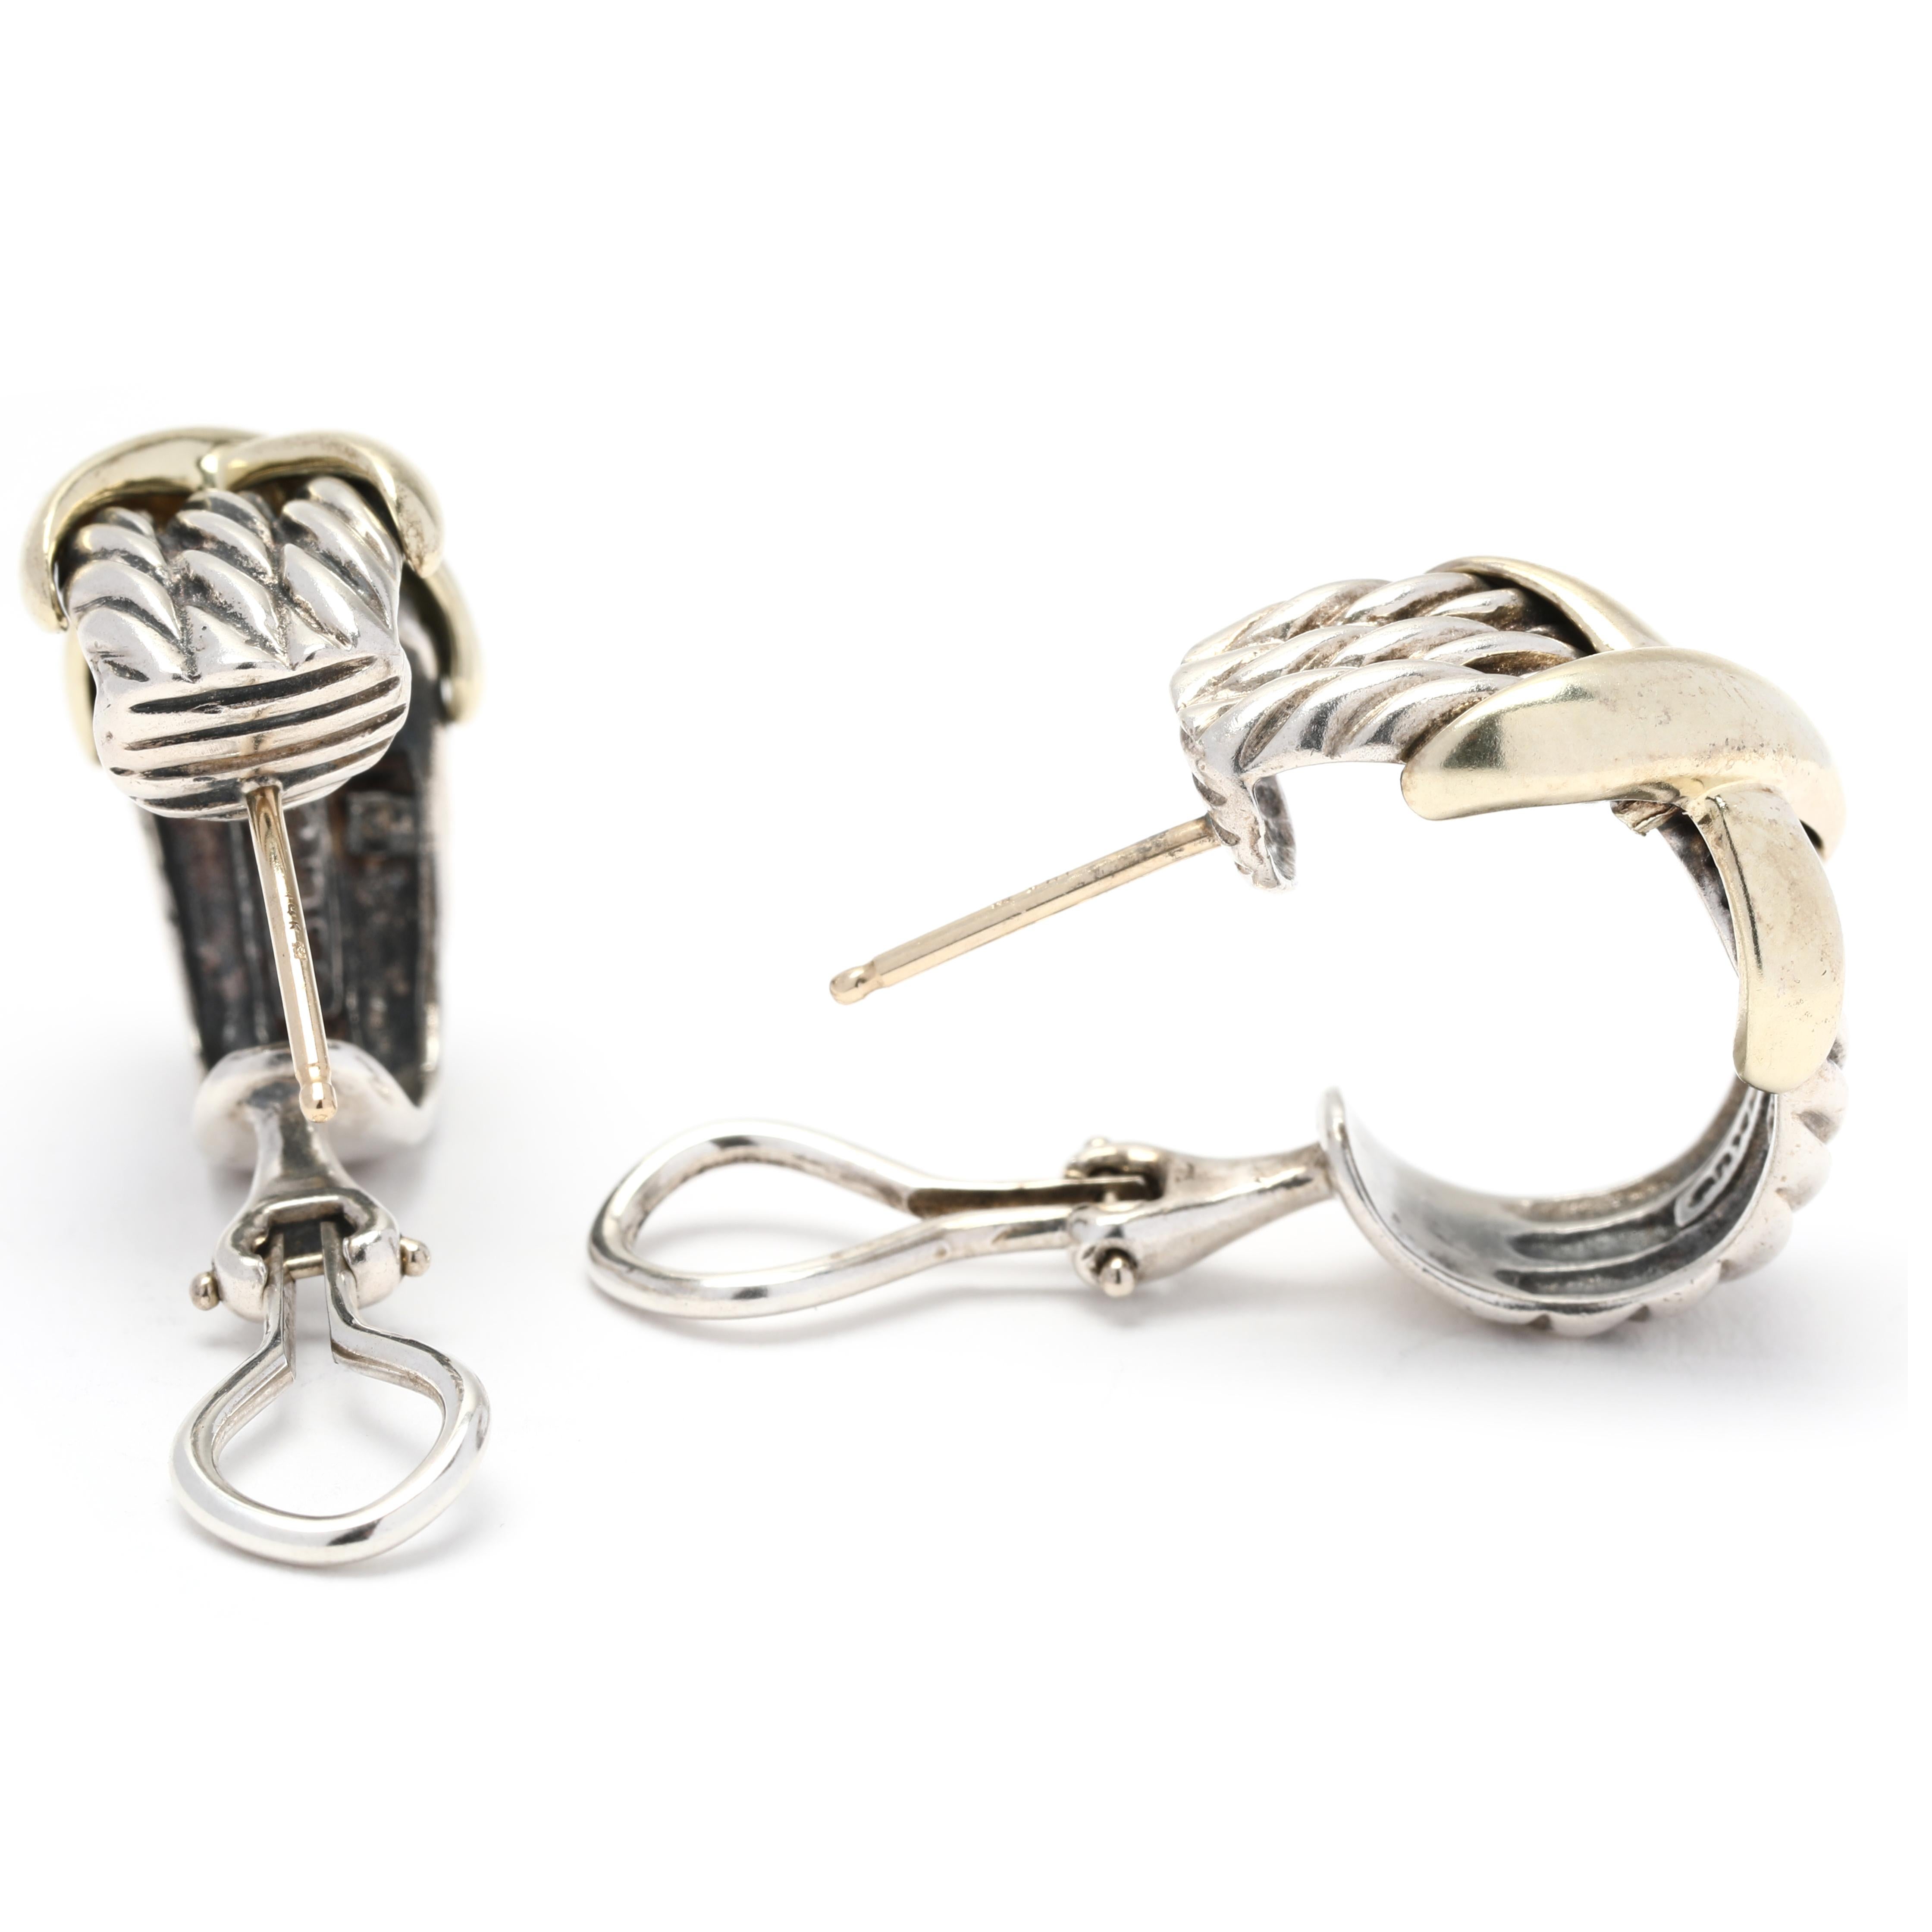 These David Yurman X Cable J Hoop Earrings are a stunning combination of 14K yellow gold and sterling silver. The two-tone design adds a modern and sophisticated touch to the classic hoop earring style. With a length of 3/4 inch, they are perfect